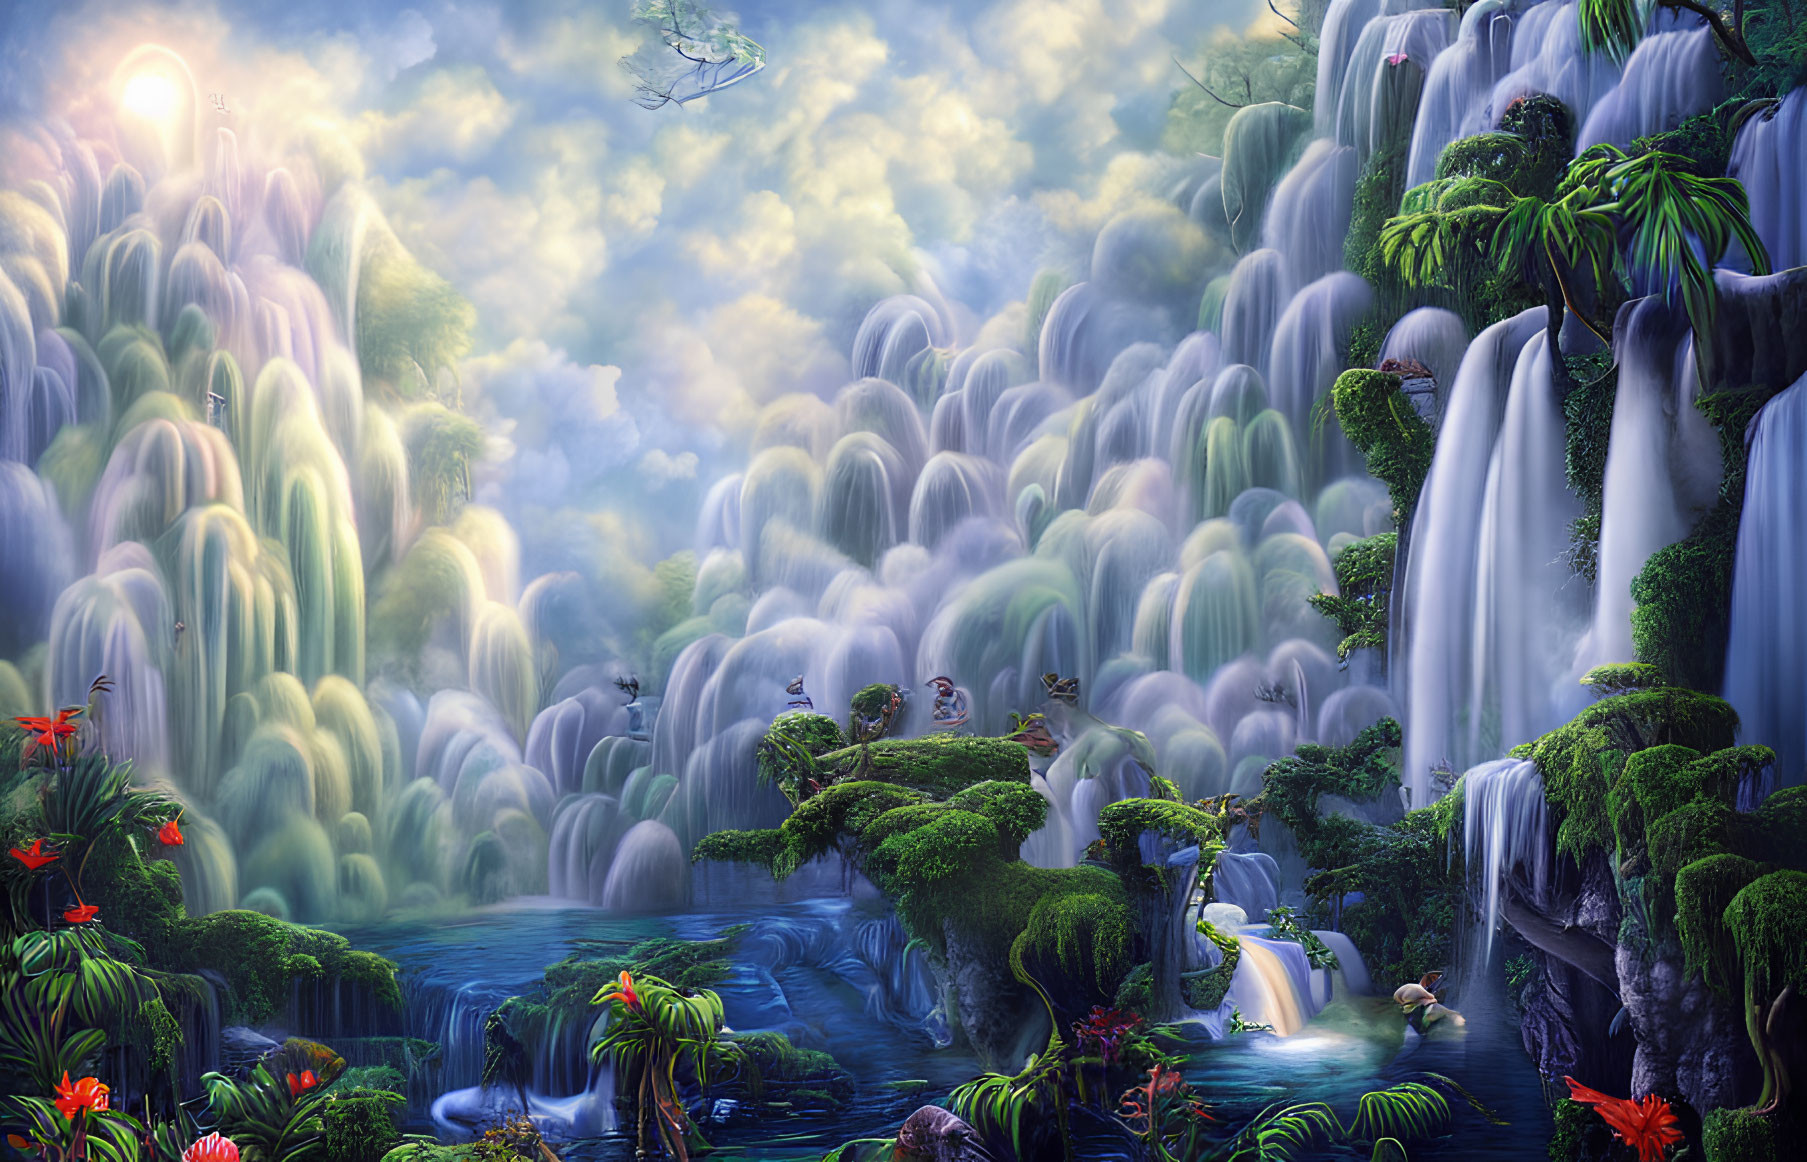 Mystical waterfall landscape with lush vegetation, animals, and glowing sunlight